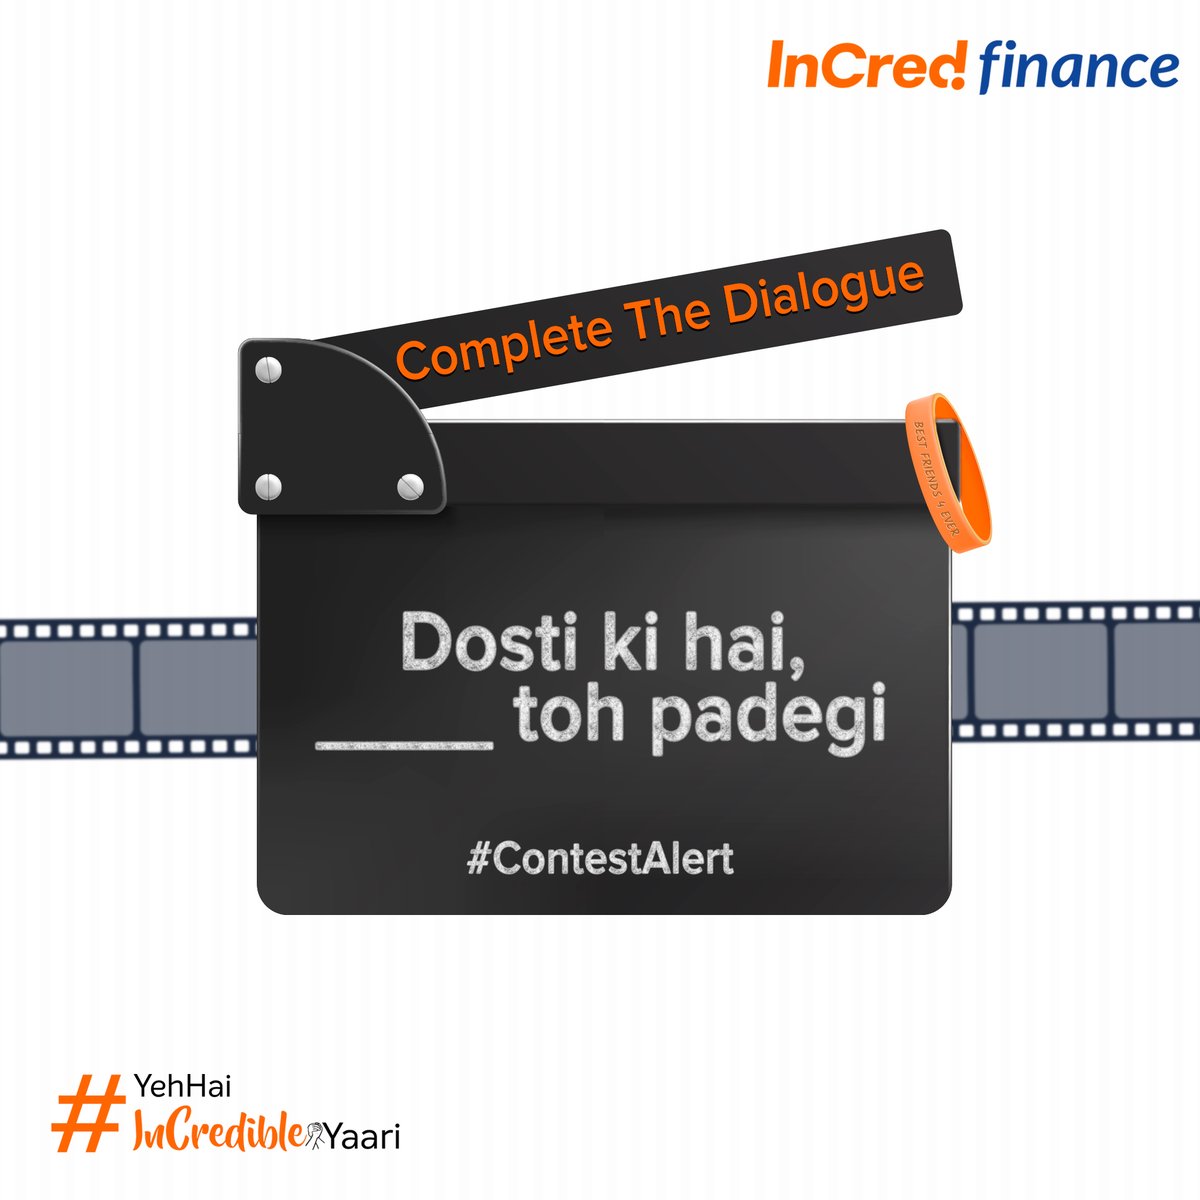 Complete this iconic dialogue that captures the true spirit of an InCredible friendship and win exciting prizes🤗🎁 Comment your answer below and stand a chance to win an InCredible prize🏆 #InCredFinance #Loans #ContestAlertIndia (Check the rules below)